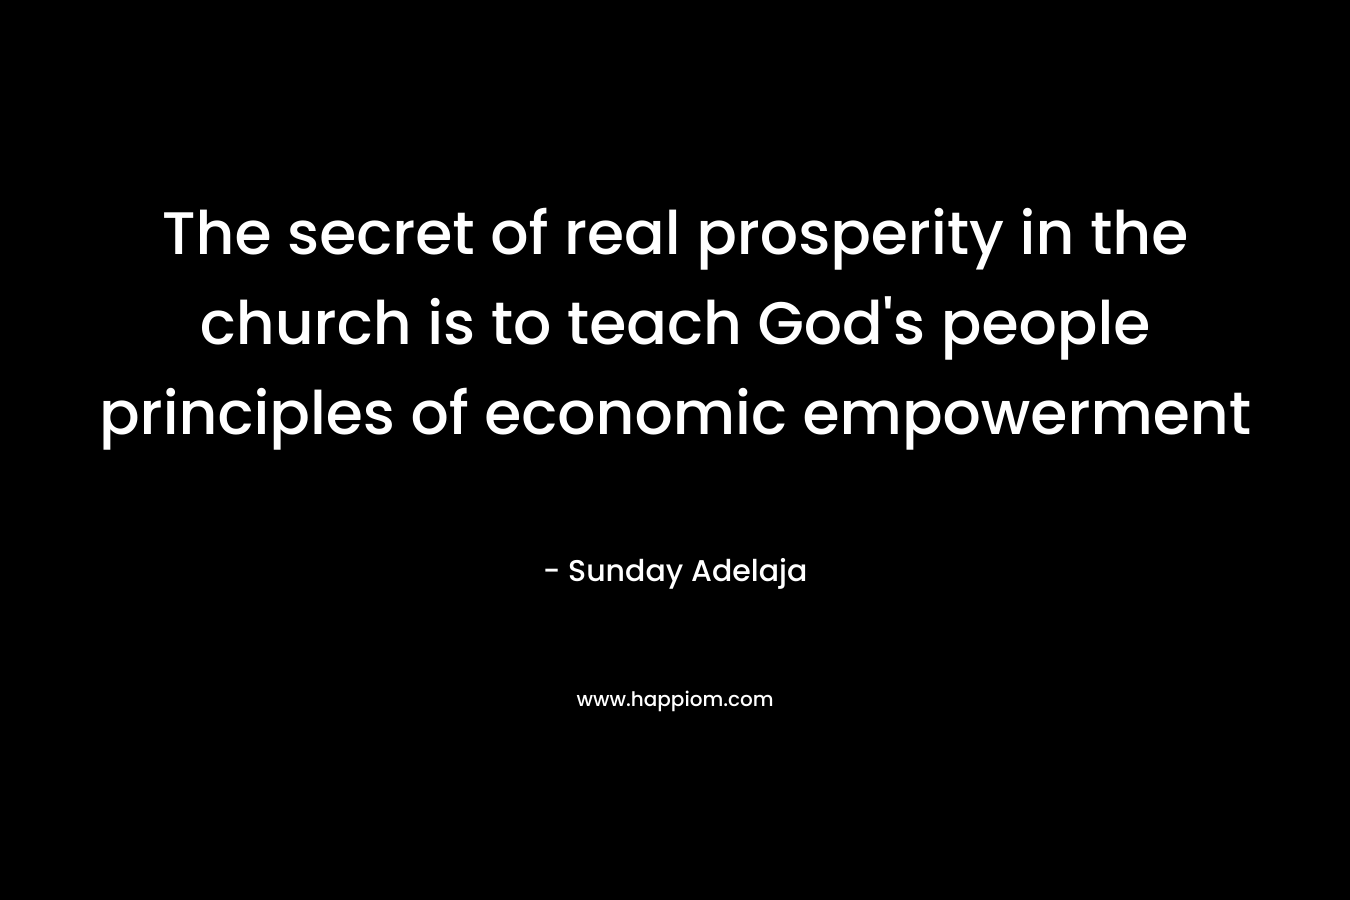 The secret of real prosperity in the church is to teach God's people principles of economic empowerment